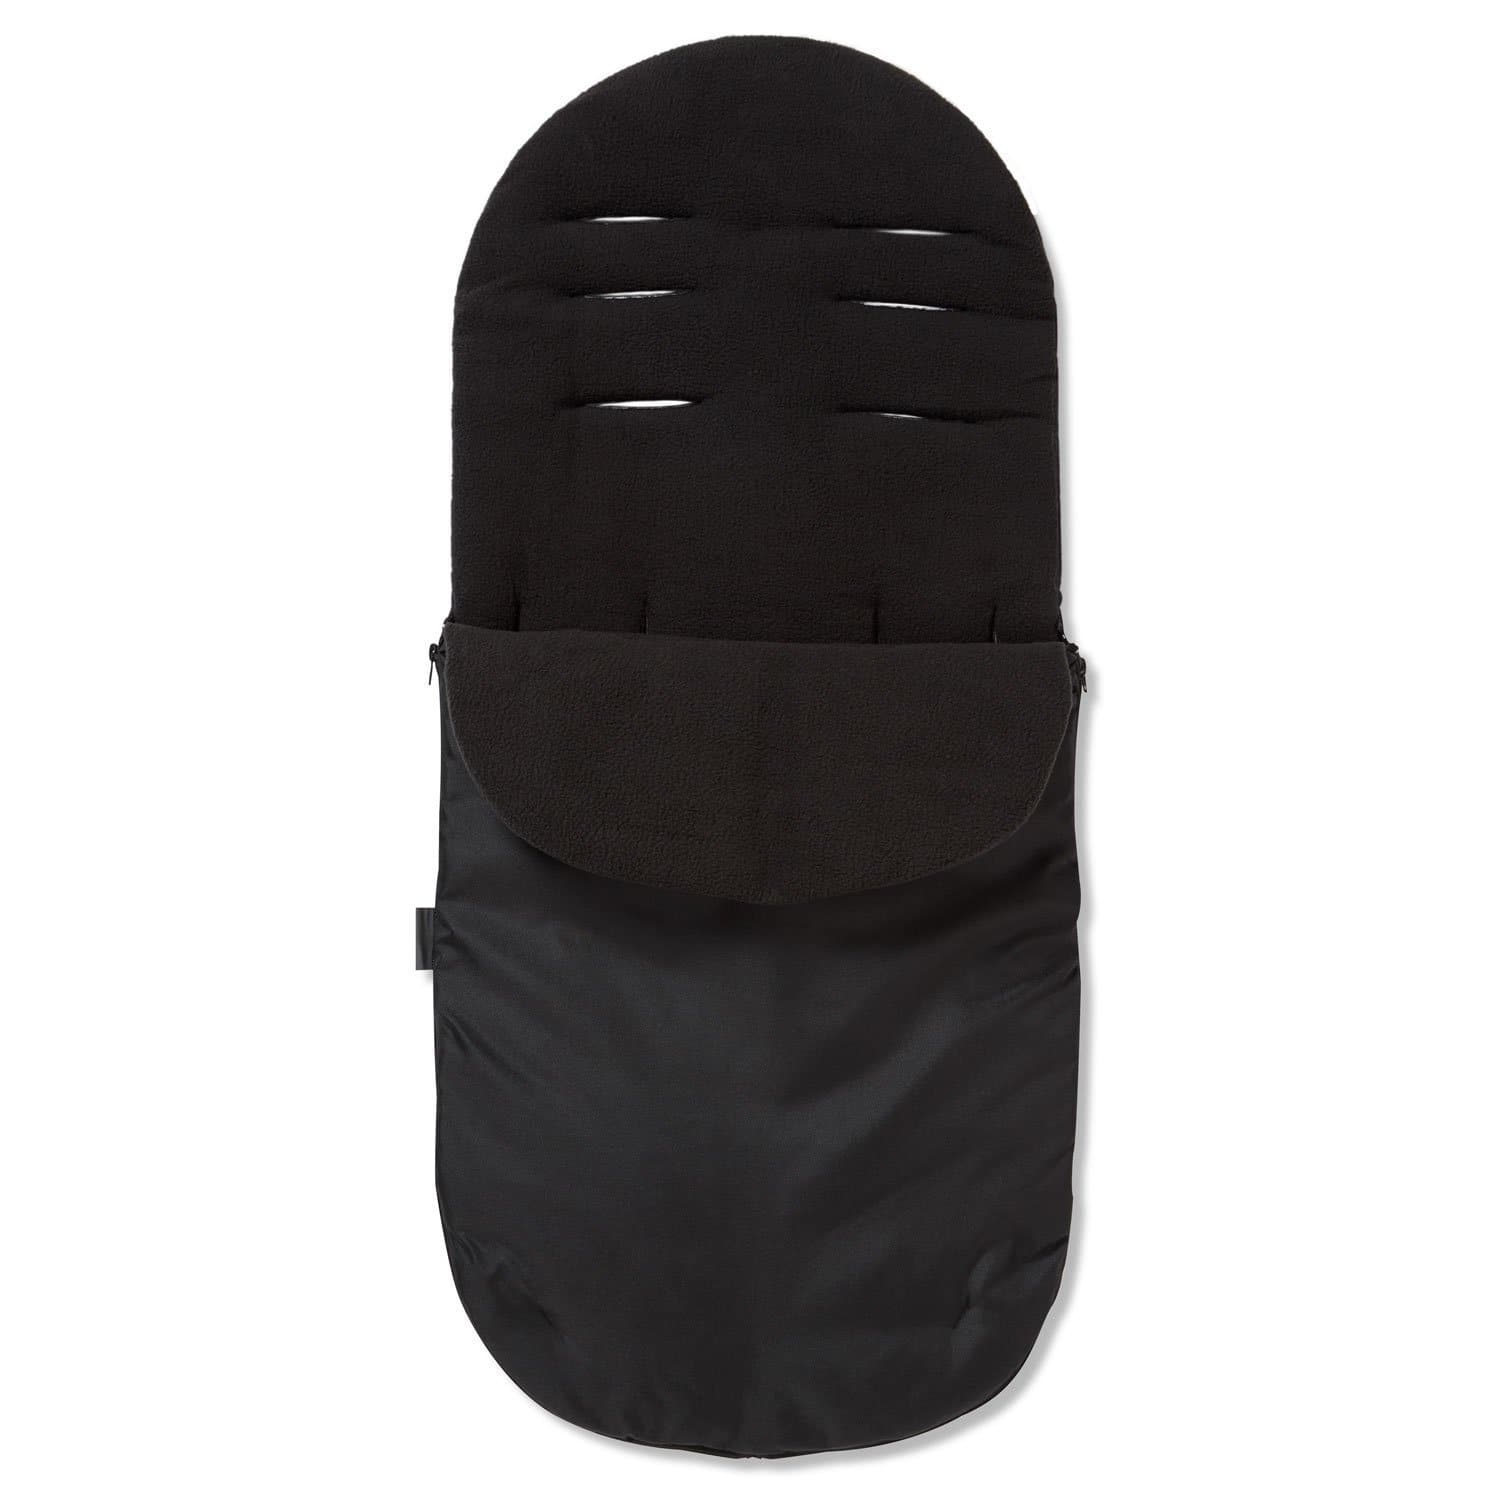 Footmuff / Cosy Toes Compatible with Maxi Cosi - For Your Little One